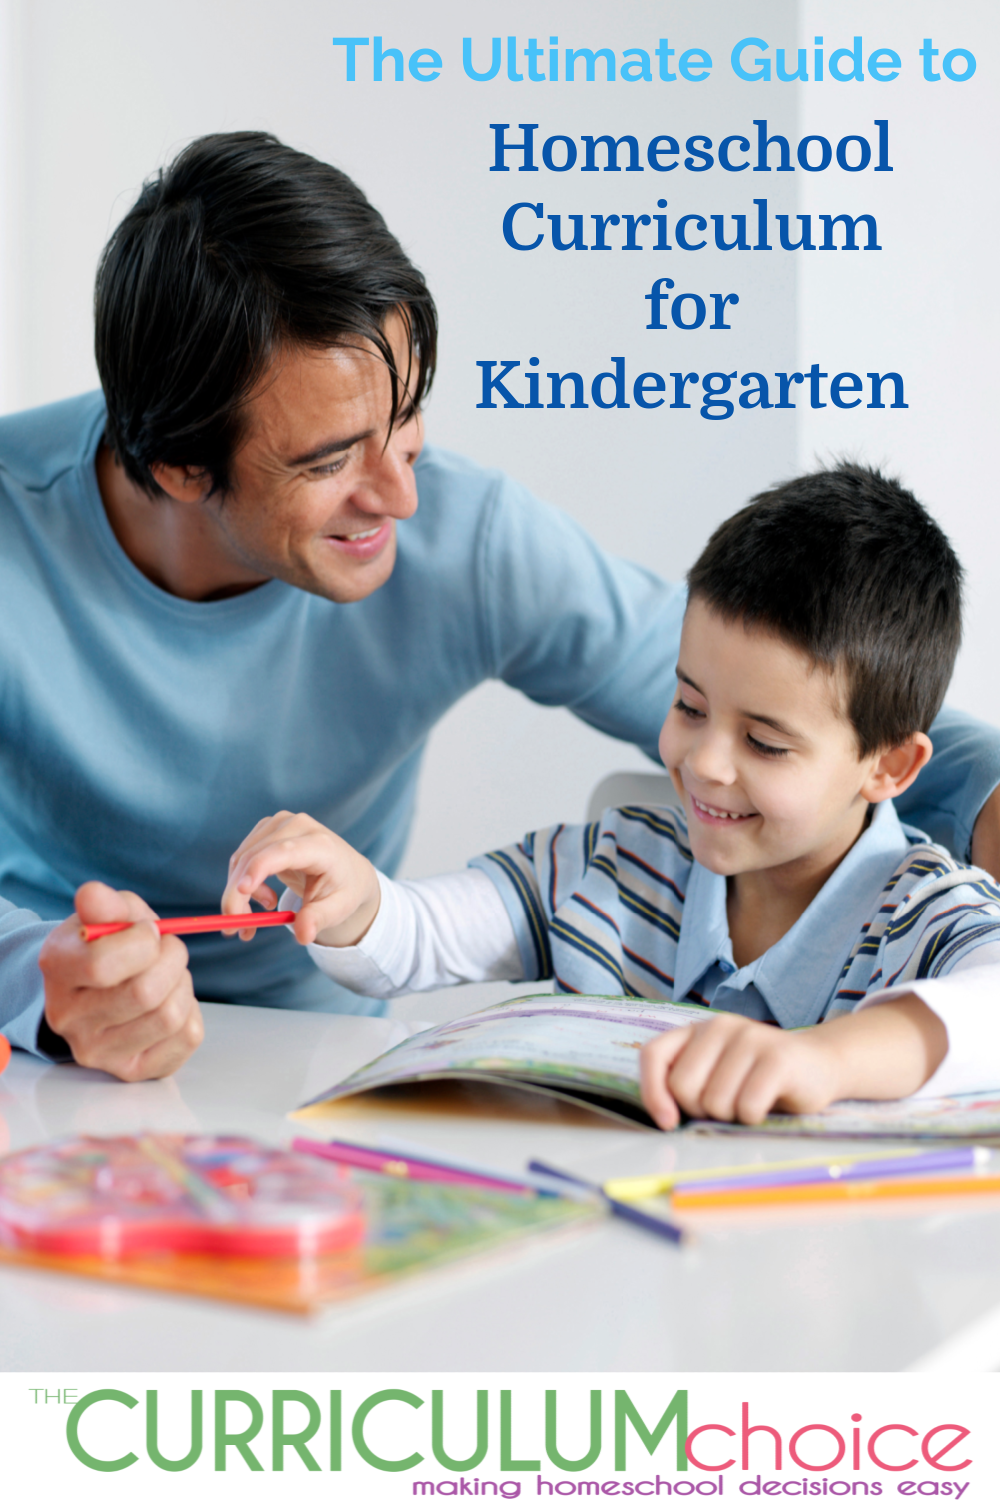 The Ultimate Guide to Homeschool Curriculum for Kindergarten is your go to guide for full or by subject curriculum for kindergarten. Online, book based, secular or Christian, we have options for you! From The Curriculum Choice